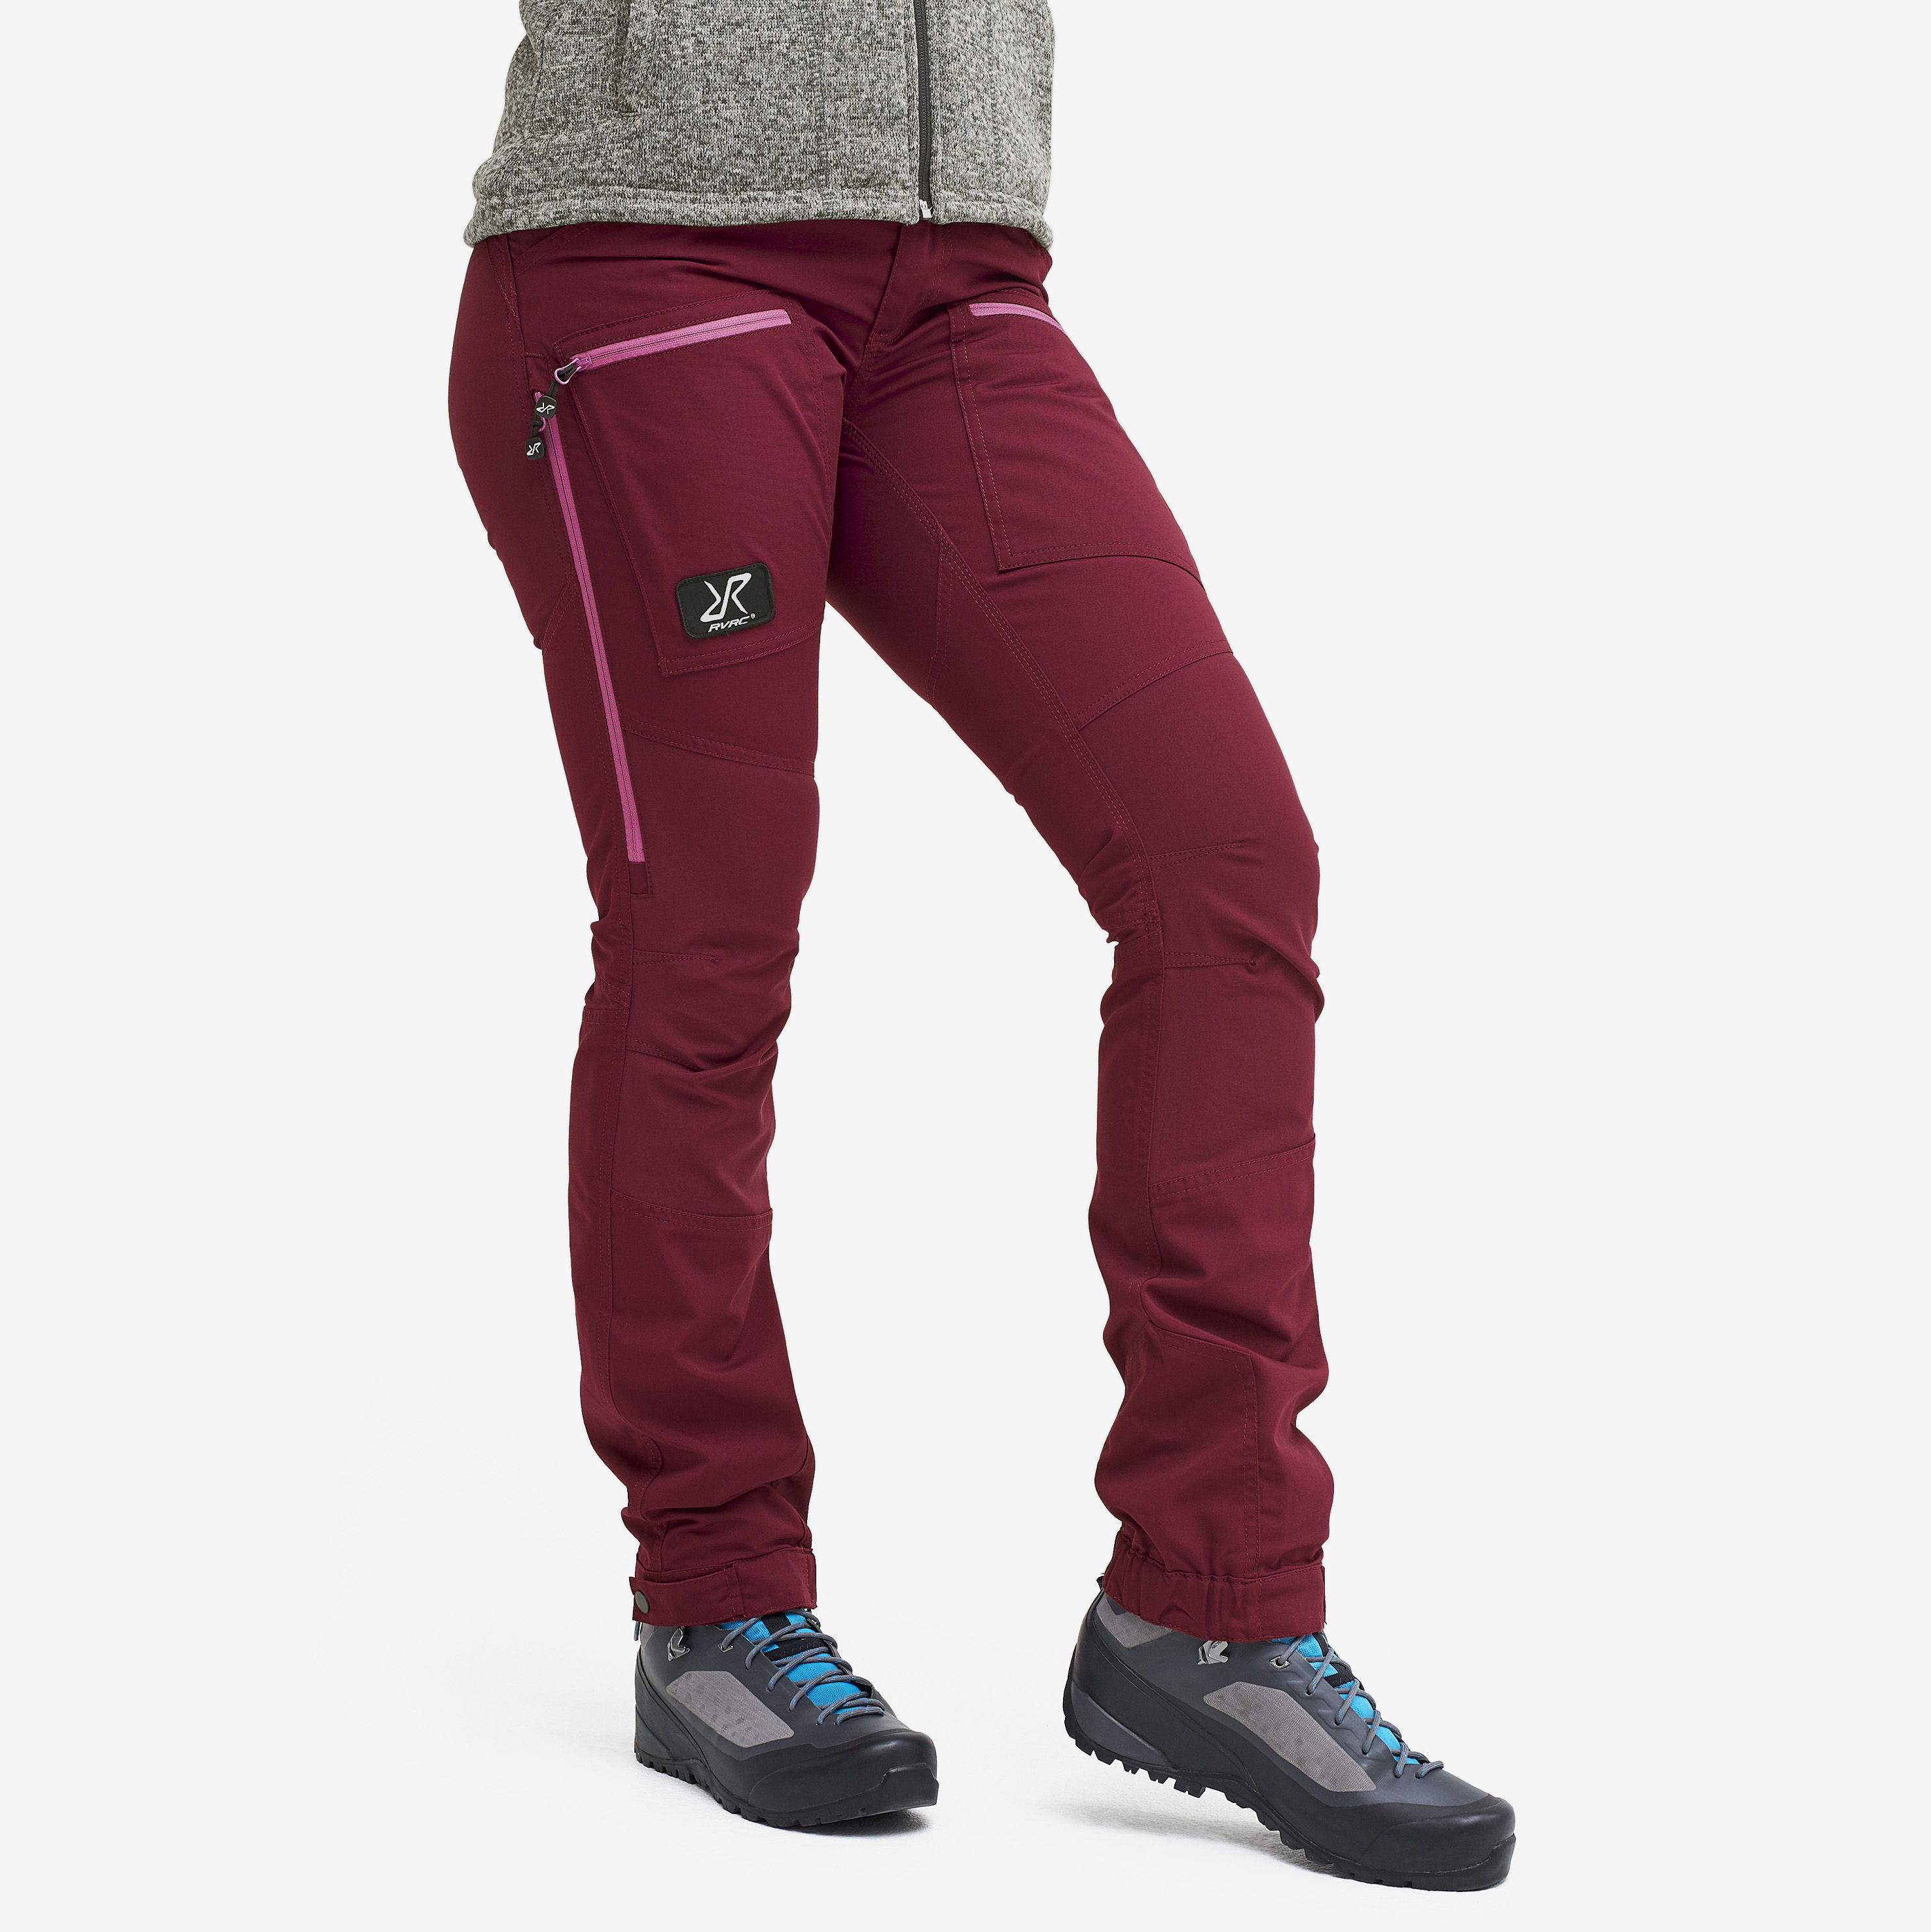 Nordwand Pro Pants Bison Red Mujeres